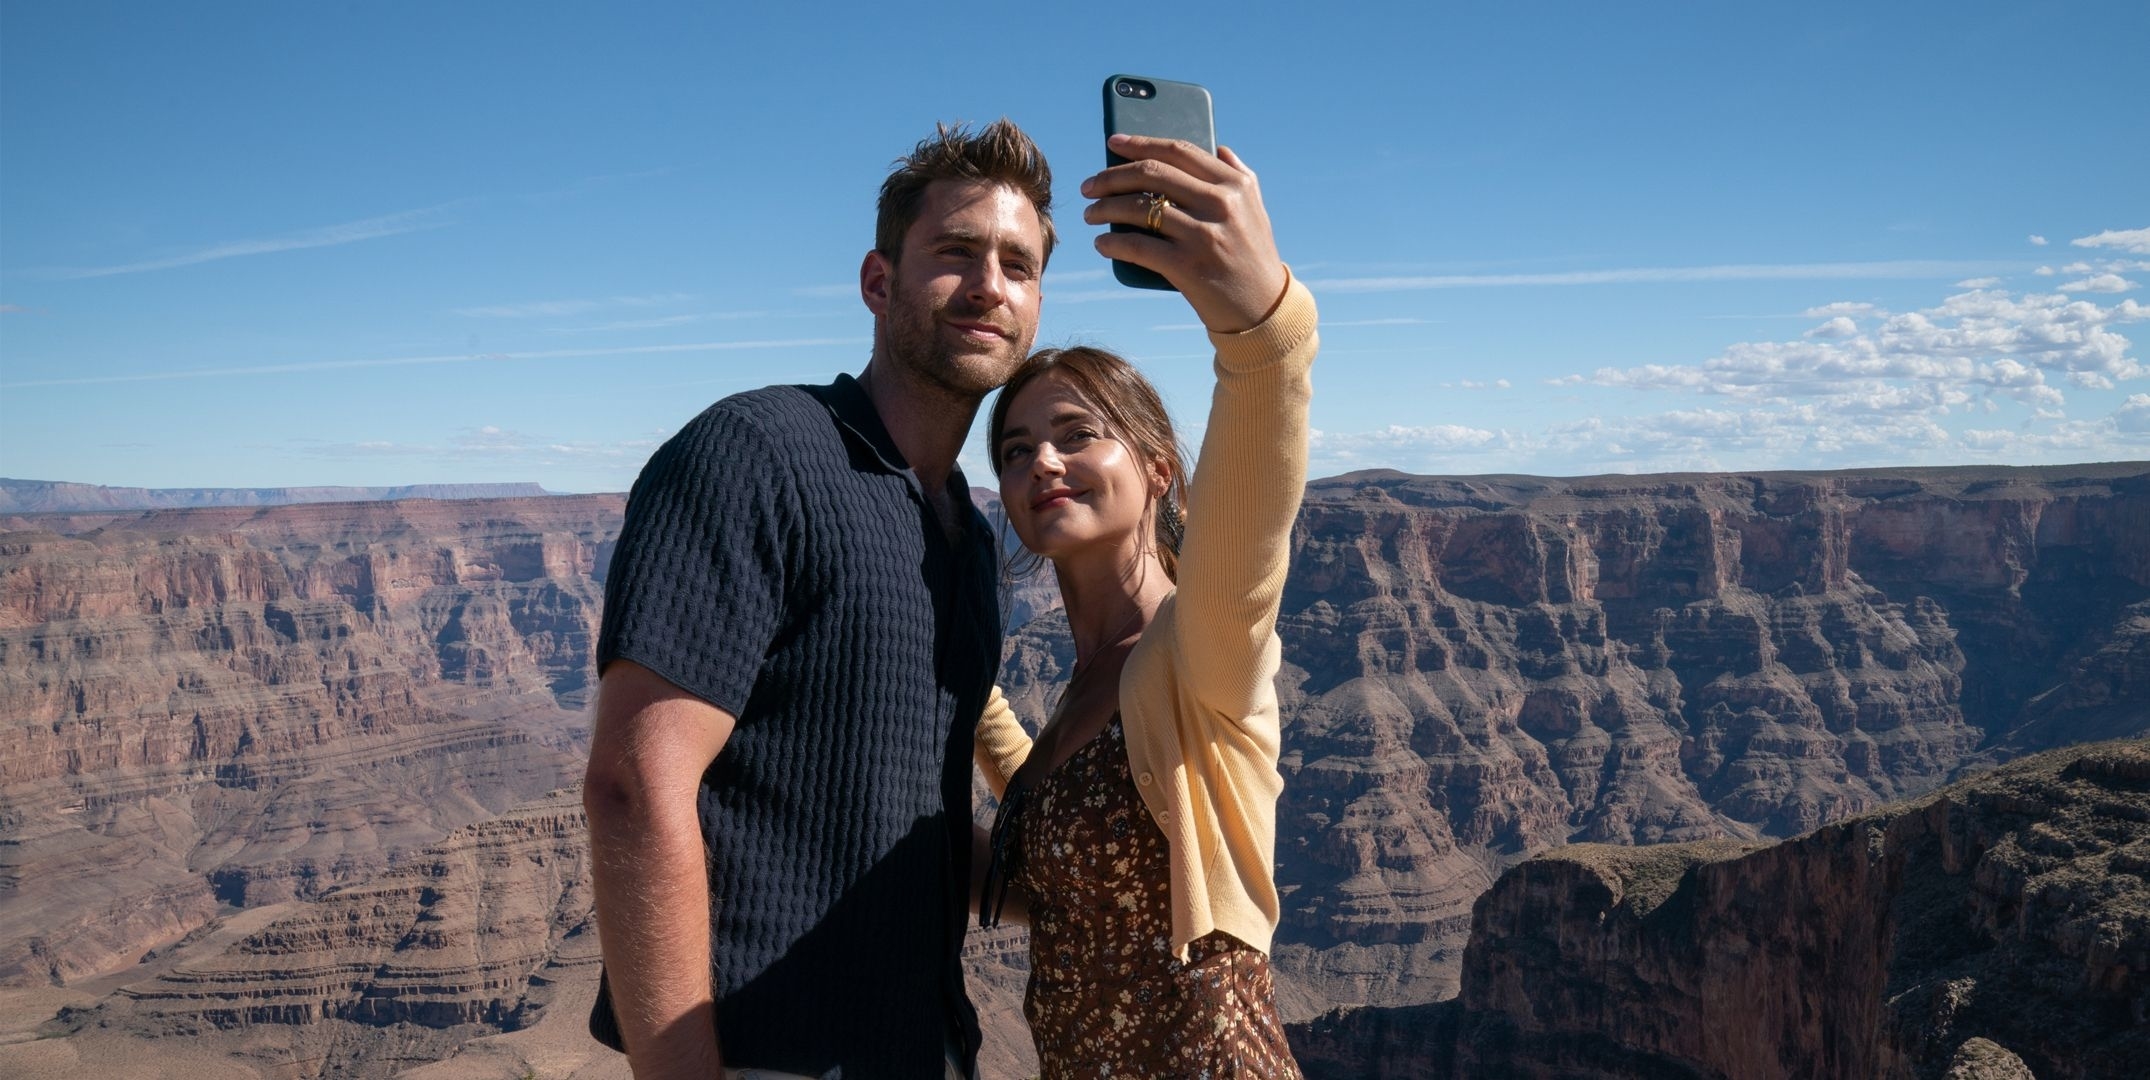 Two people taking a selfie with the Grand Canyon in the background